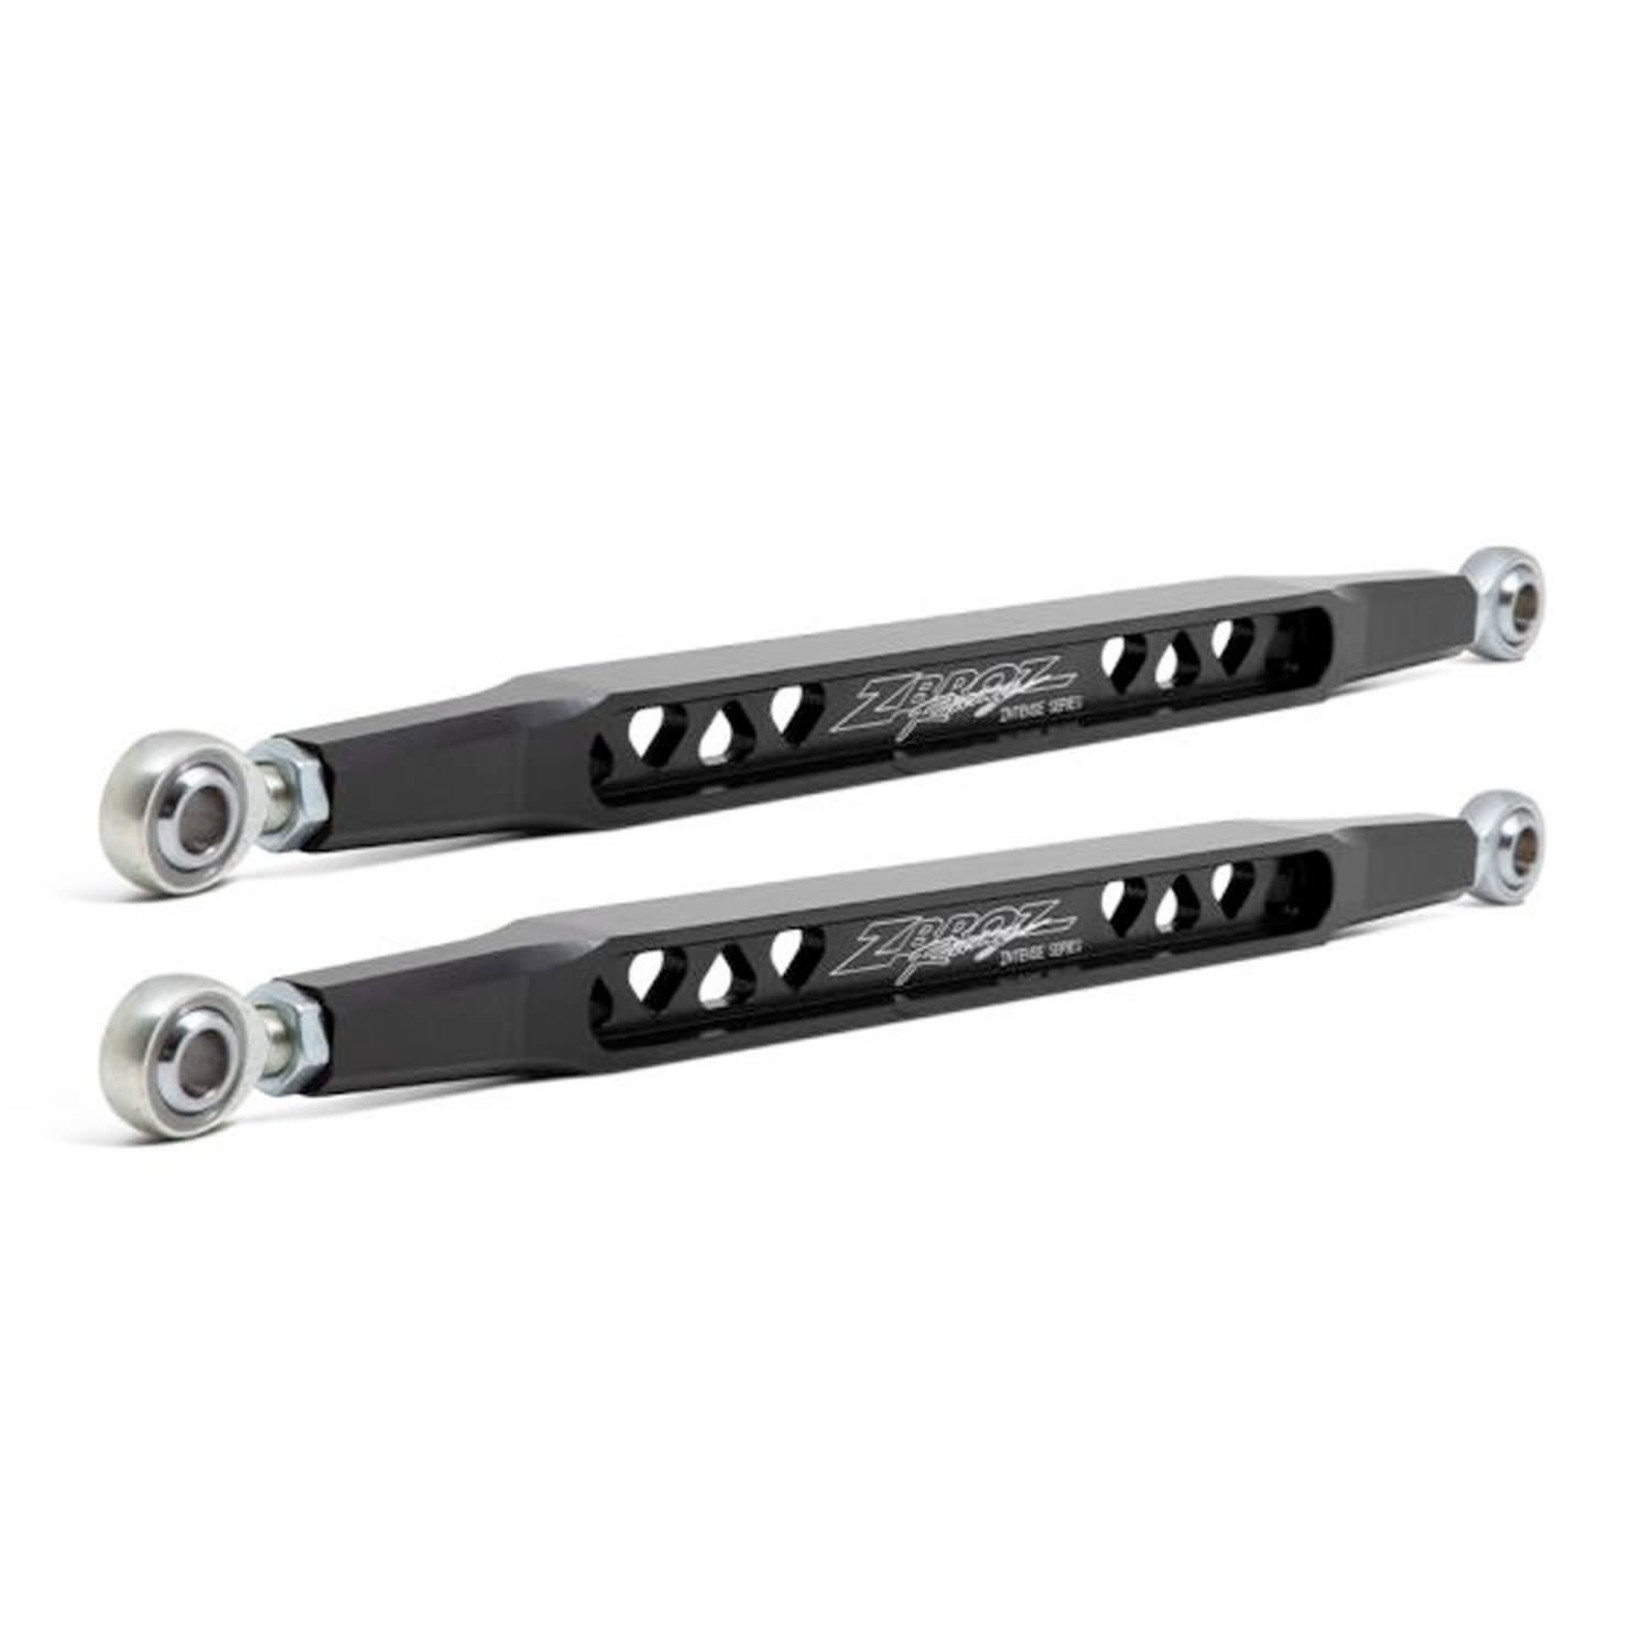 ZBROZ Racing ZBROZ Racing Intense Upper Billet Radius Rods for Can-Am X3 72"